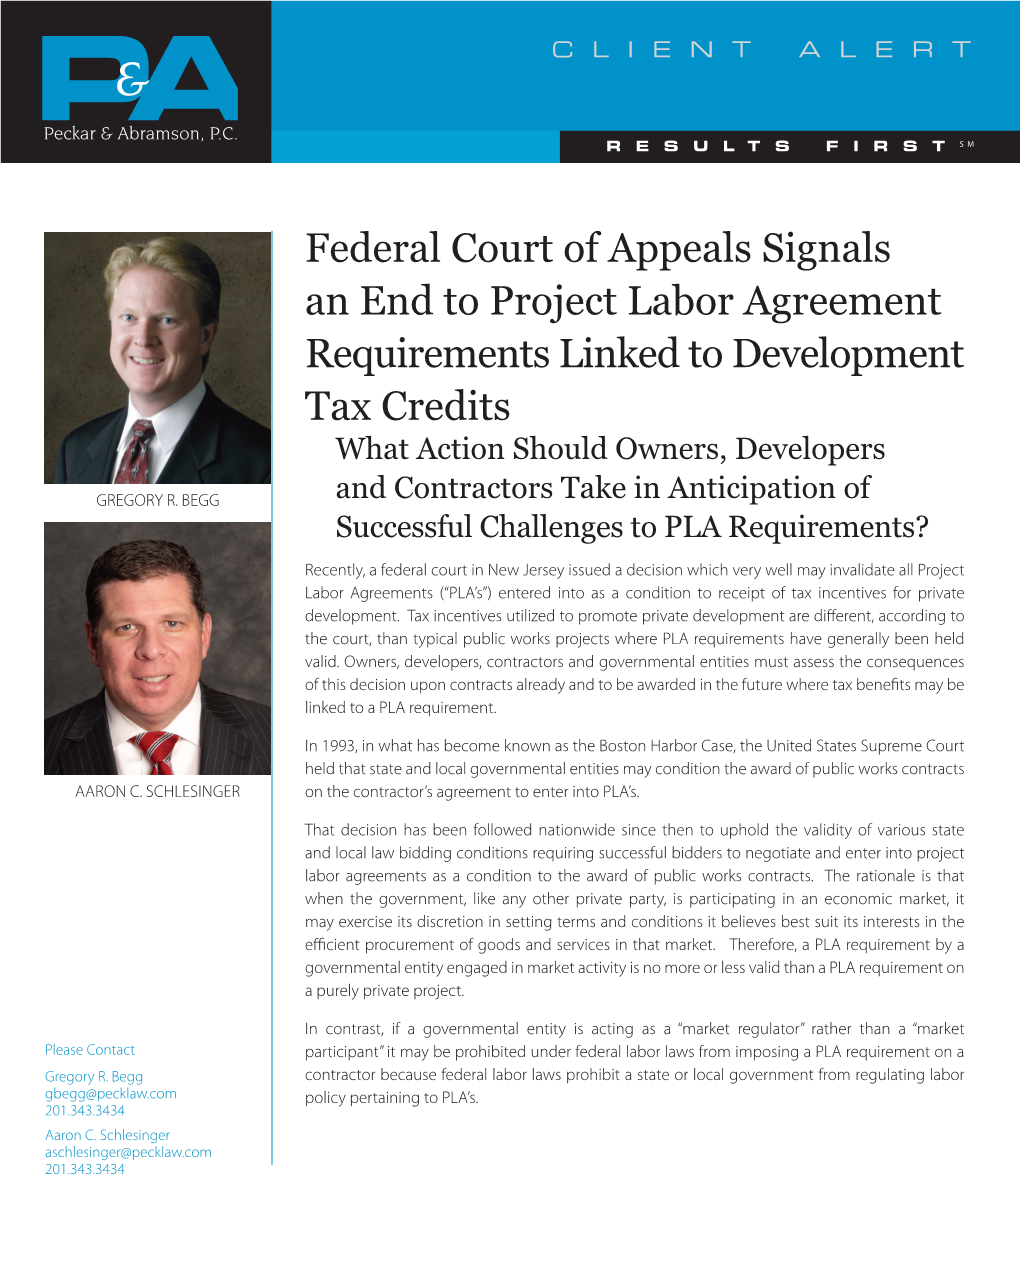 Federal Court of Appeals Signals an End to Project Labor Agreement Requirements Linked to Development Tax Credits What Action Should Owners, Developers